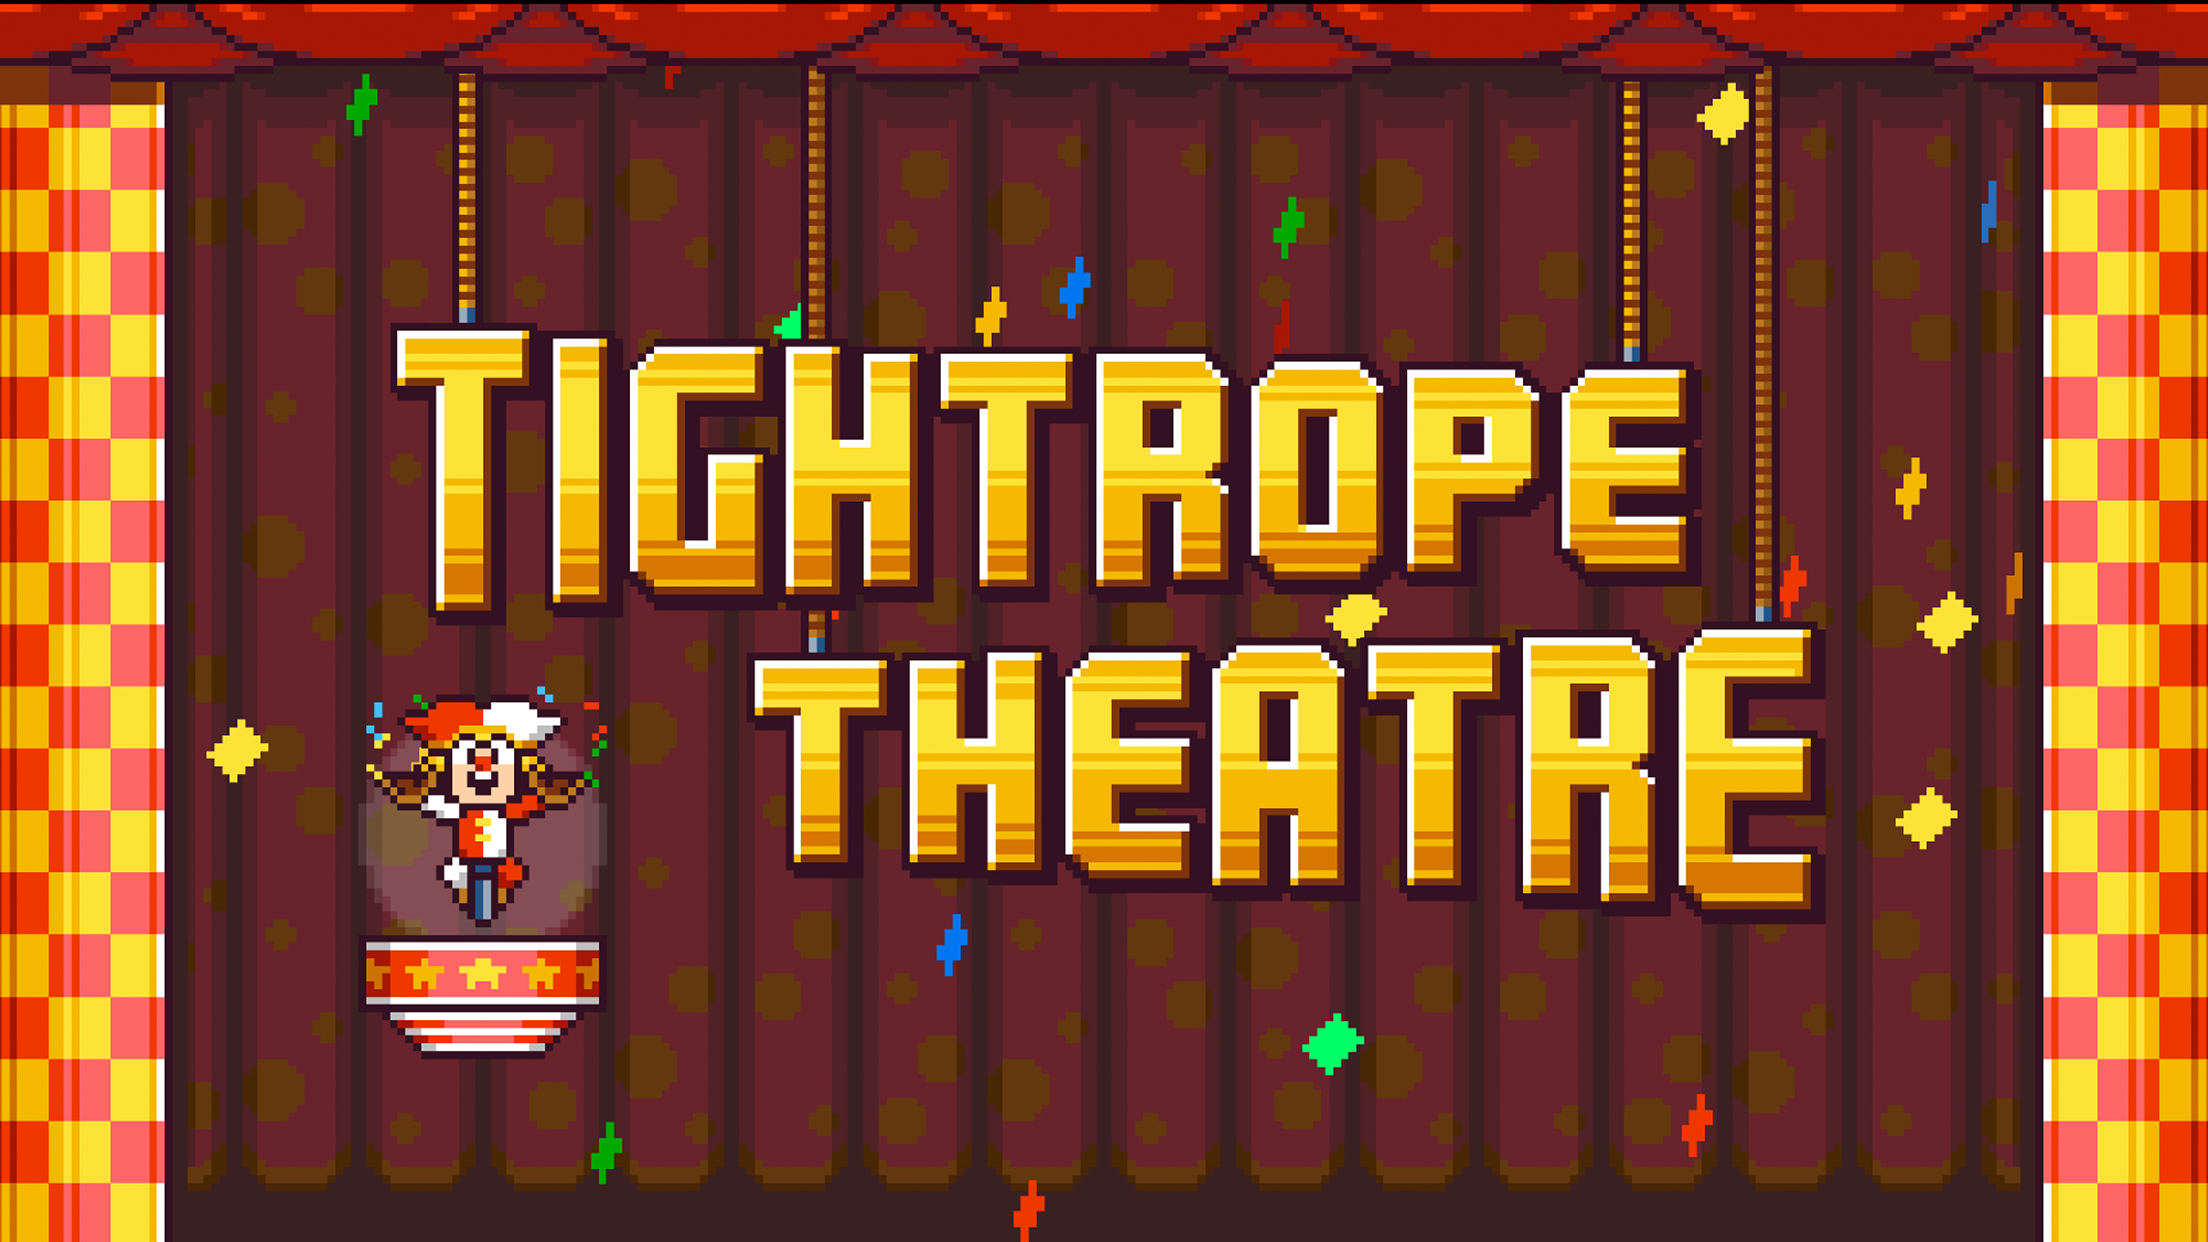 Tightrope Theatre - Game for Mac, Windows (PC), Linux - WebCatalog